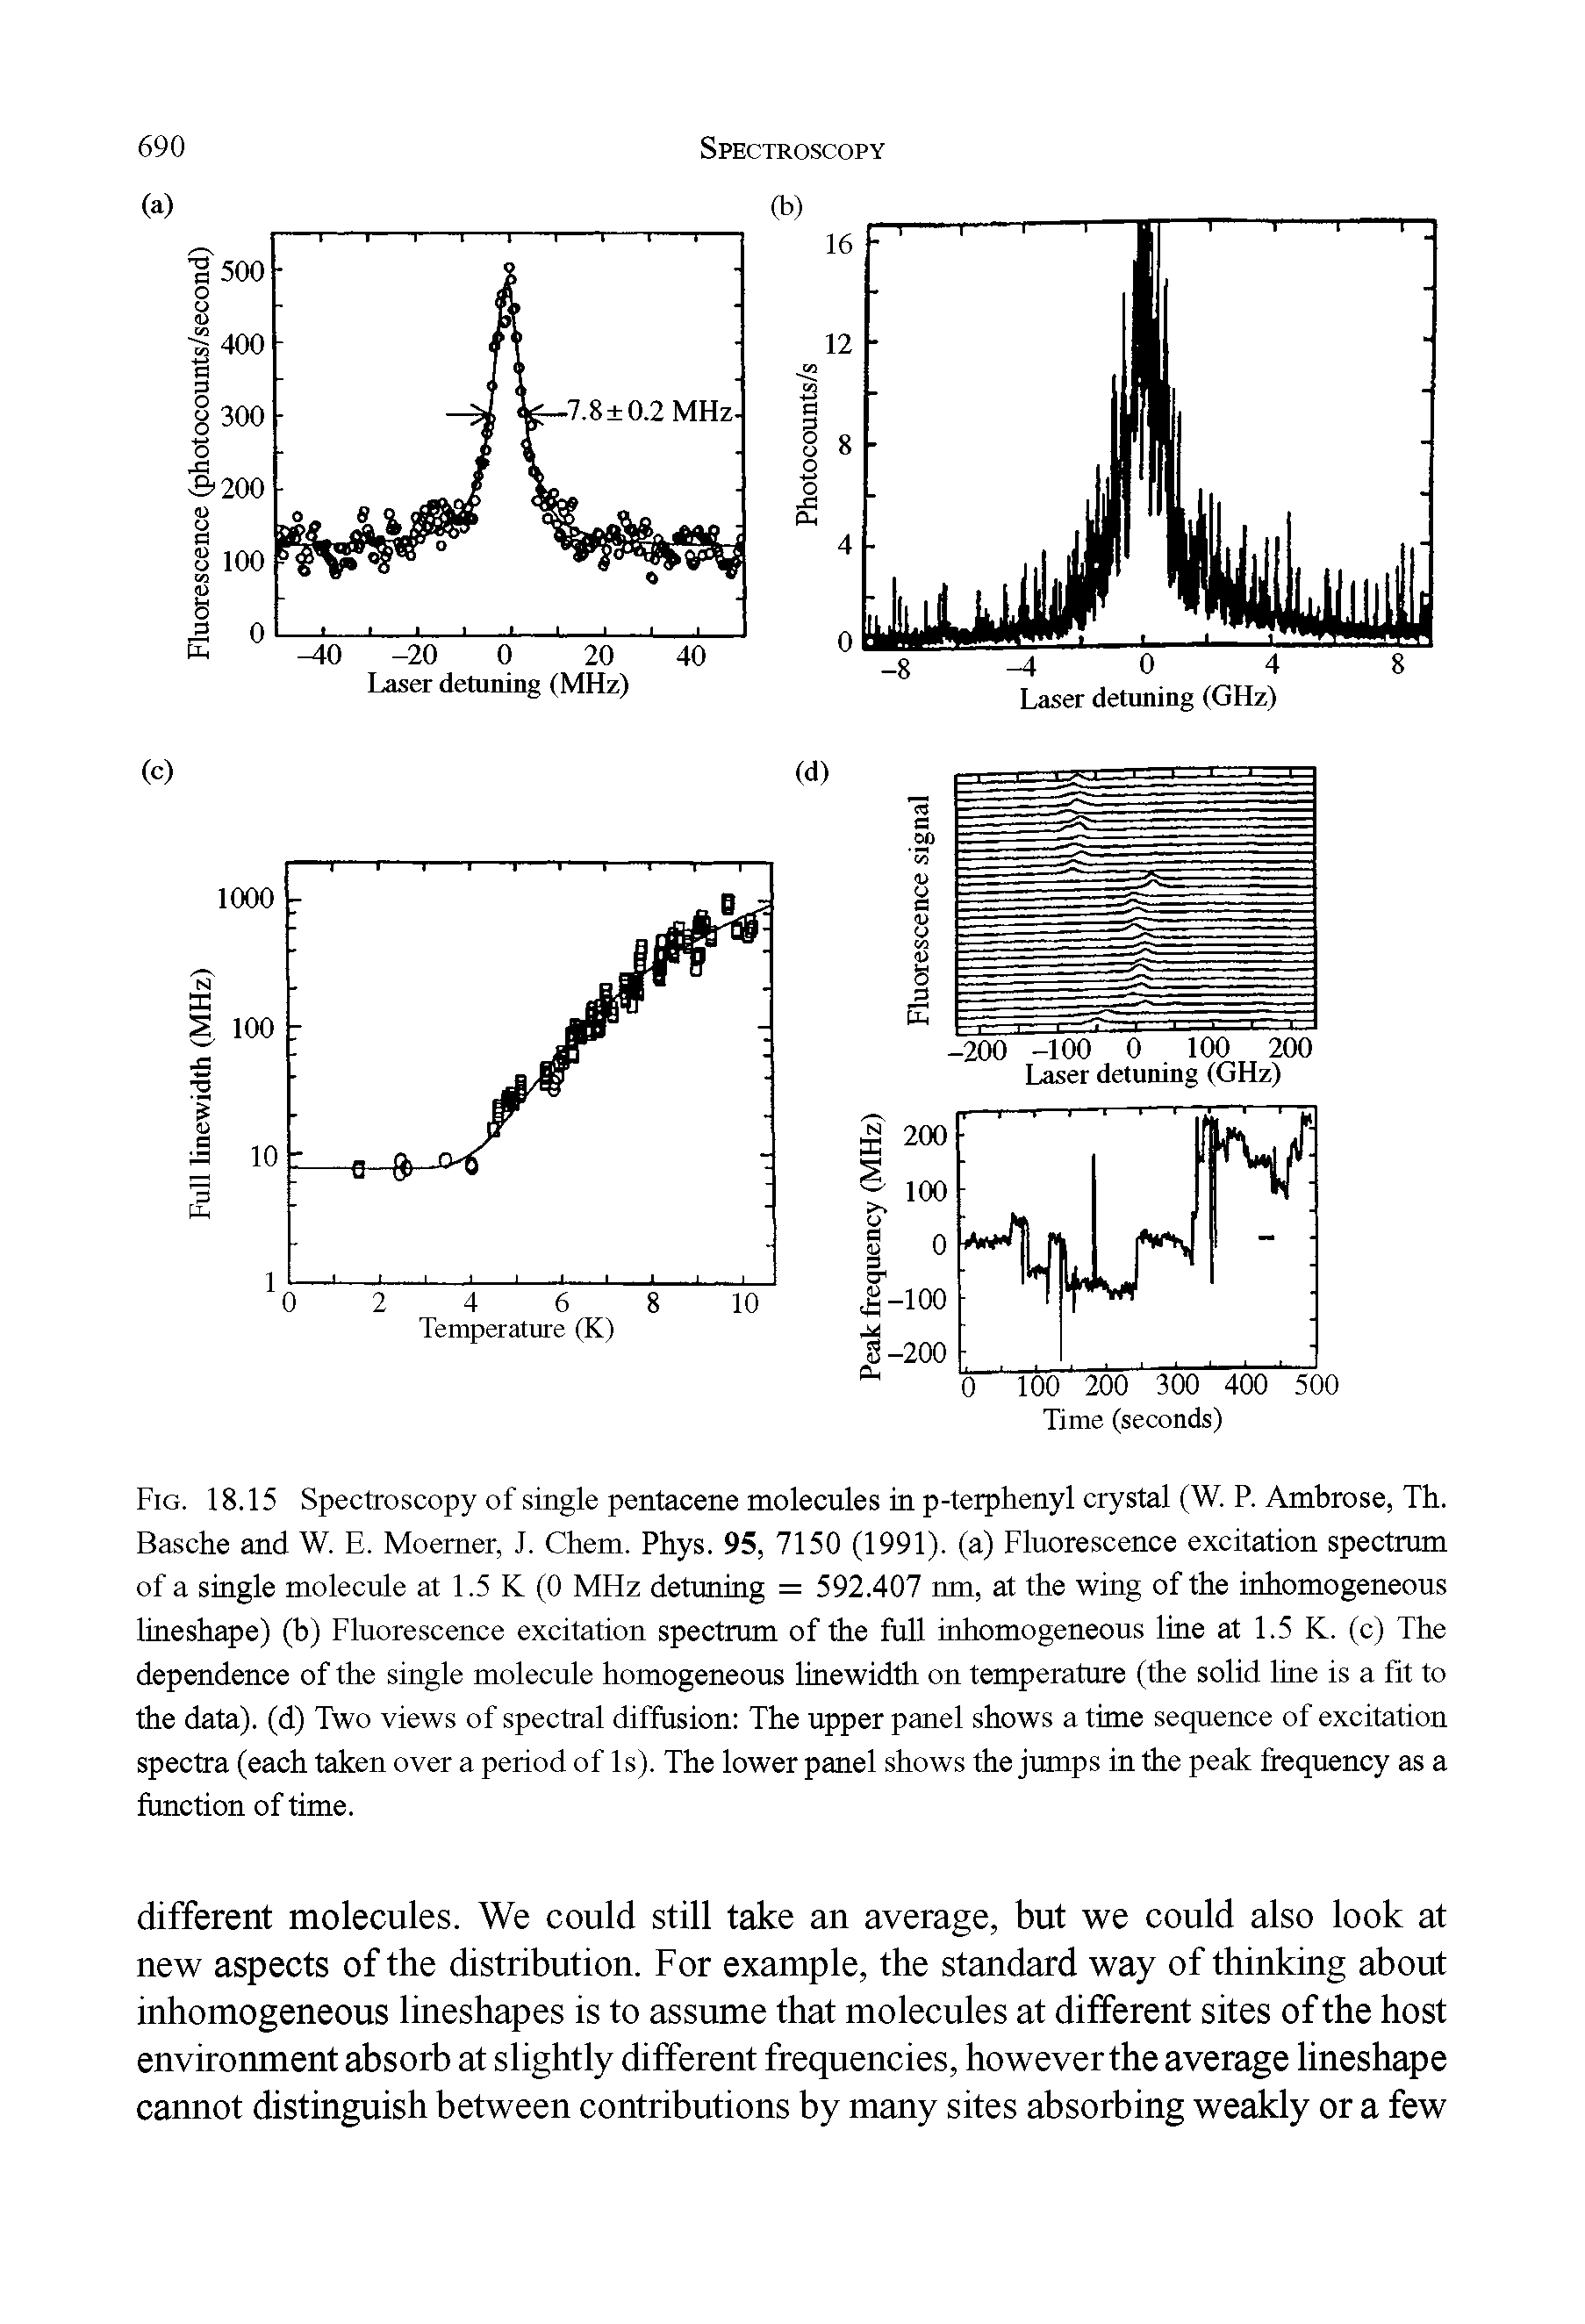 Fig. 18.15 Spectroscopy of single pentacene molecules in p-terphenyl crystal (W. P. Ambrose, Th. Basche and W. E. Moemer, 1. Chem. Phys. 95, 7150 (1991). (a) Fluorescence excitation spectrum of a single molecule at 1.5 K (0 MHz detuning = 592.407 nm, at the wing of the inhomogeneous hneshape) (b) Fluorescence excitation spectrum of the full inhomogeneous line at 1.5 K. (c) The dependence of the single molecule homogeneous hnewidth on temperature (the solid line is a fit to the data), (d) Two views of spectral diffusion The upper panel shows a time sequence of excitation spectra (each taken over a period of 1 s). The lower panel shows the jumps in the peak frequency as a function of time.